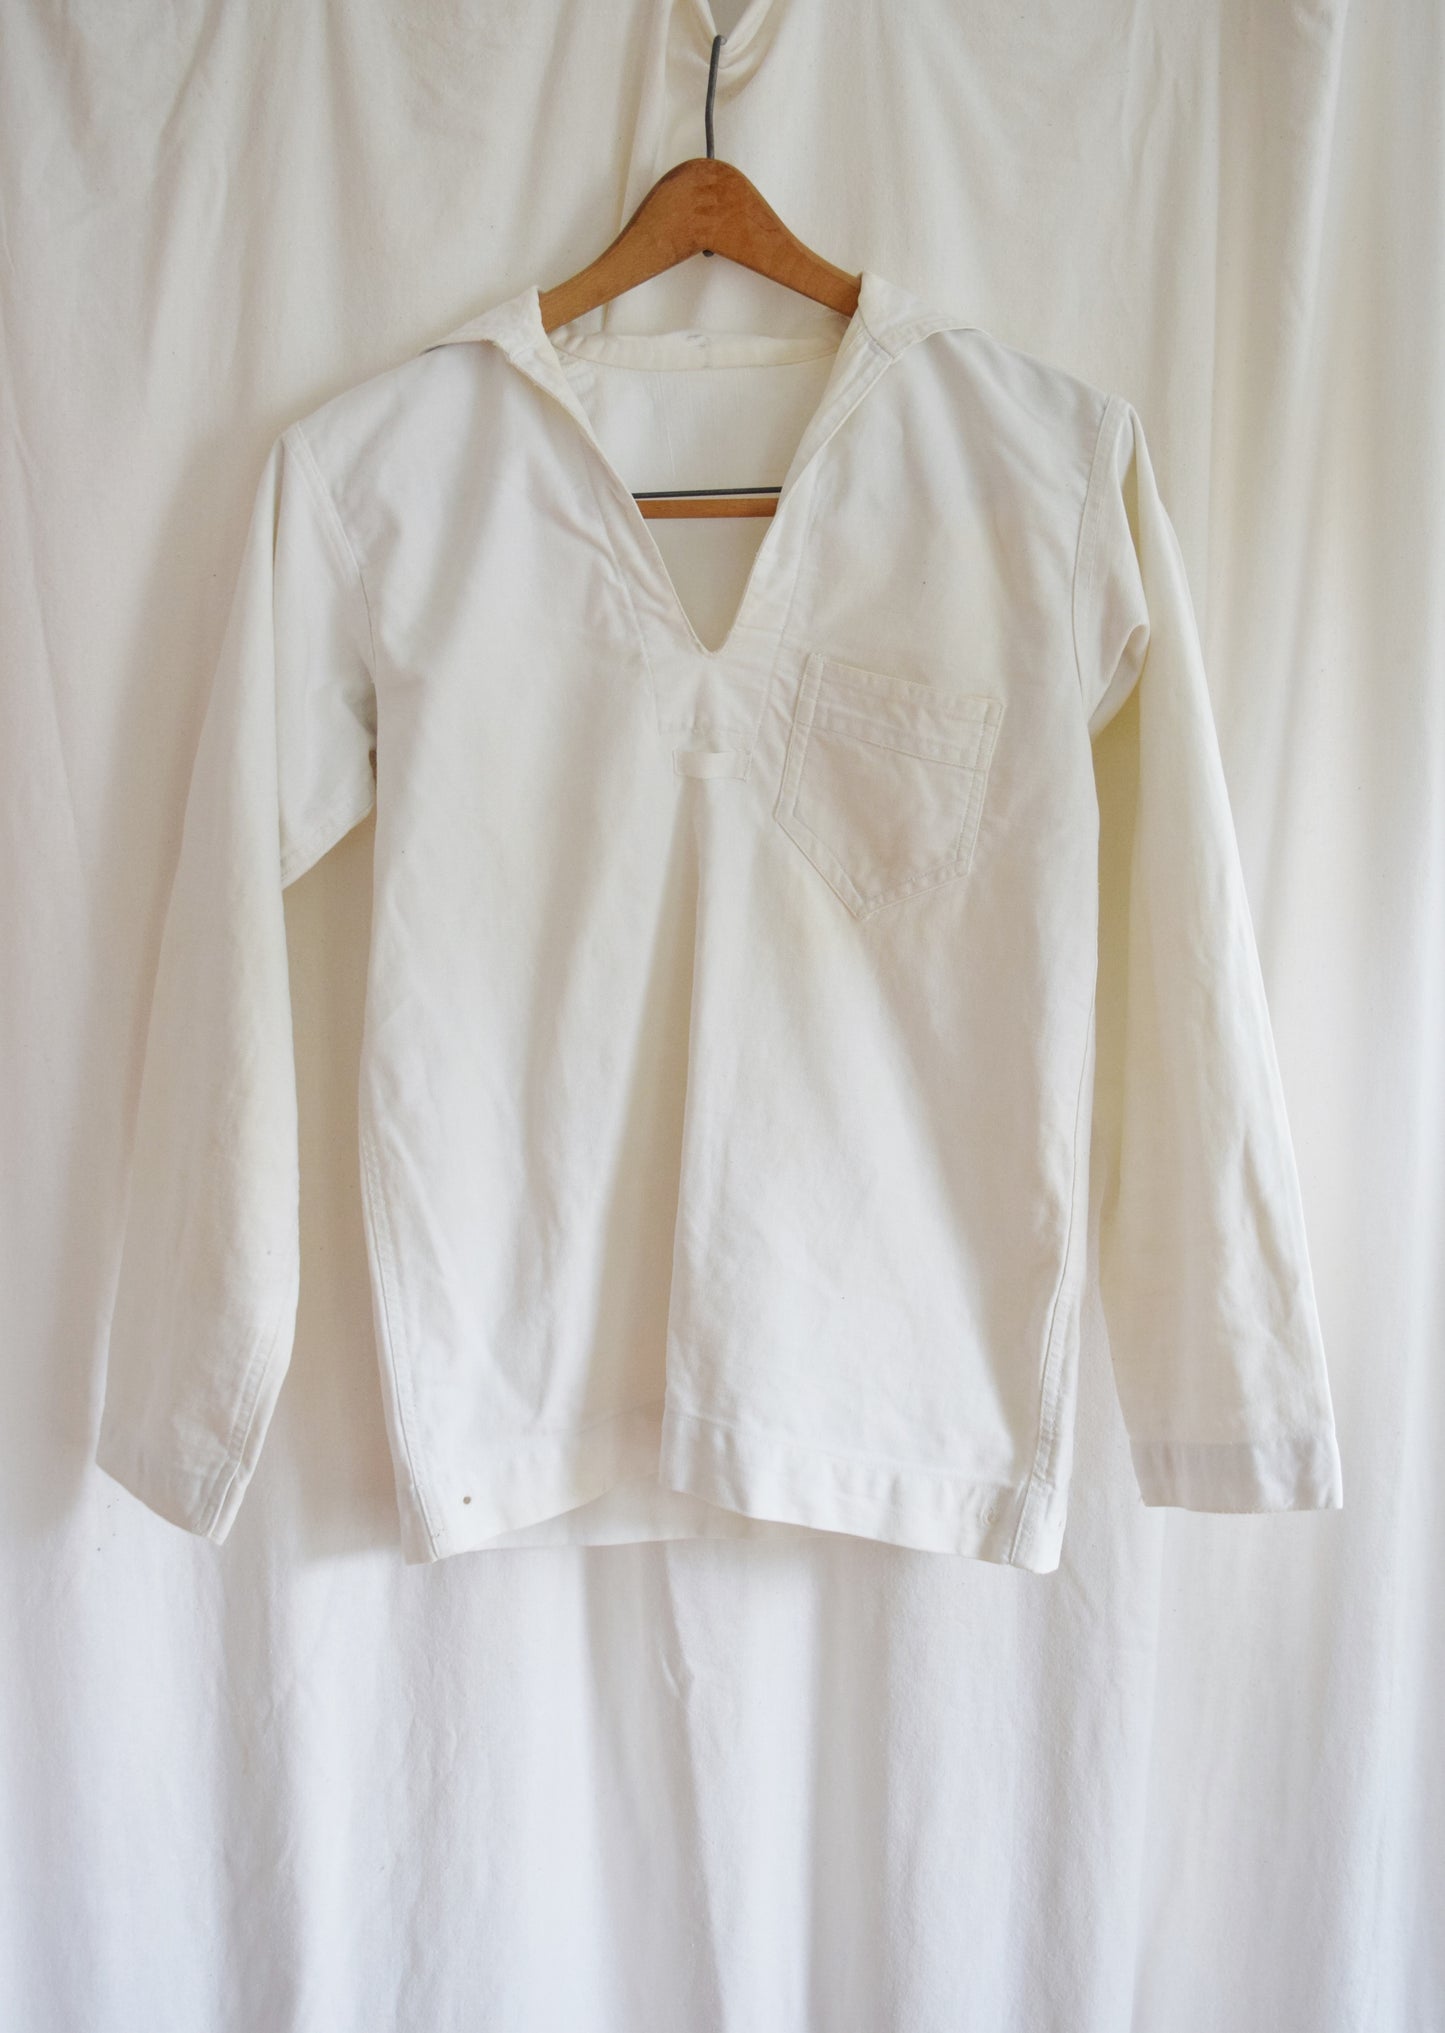 Early 20th Century Navy-Issue White Canvas Shirt